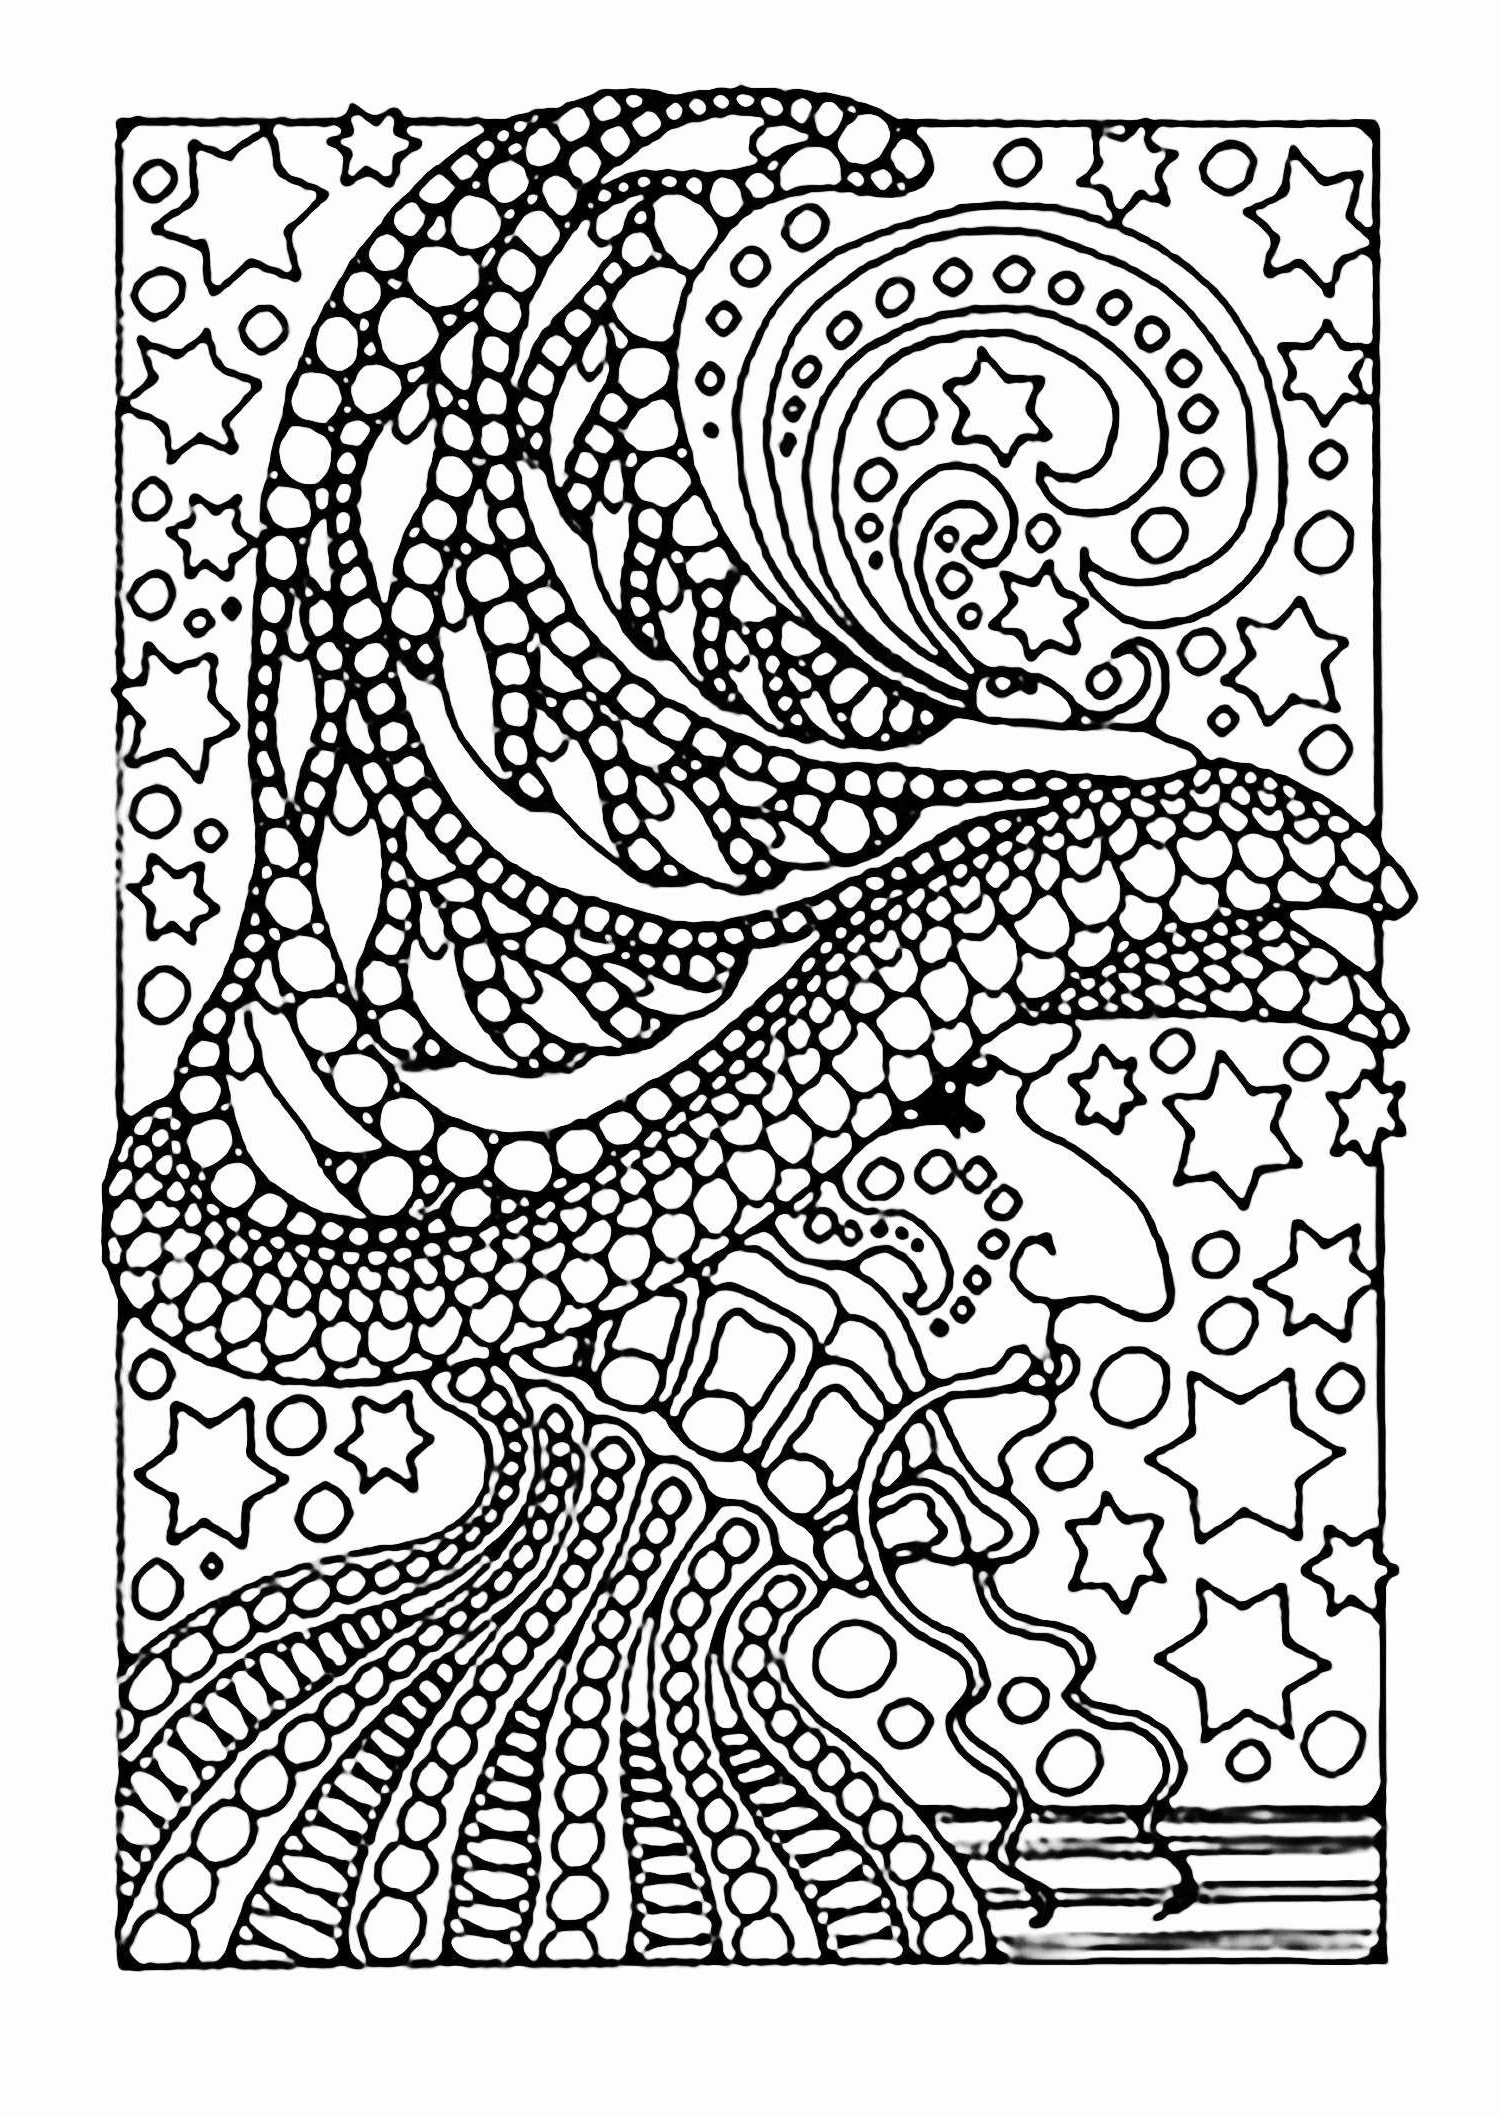 chinchilla coloring page best of gallery 31 luxus kinder garten of chinchilla coloring page